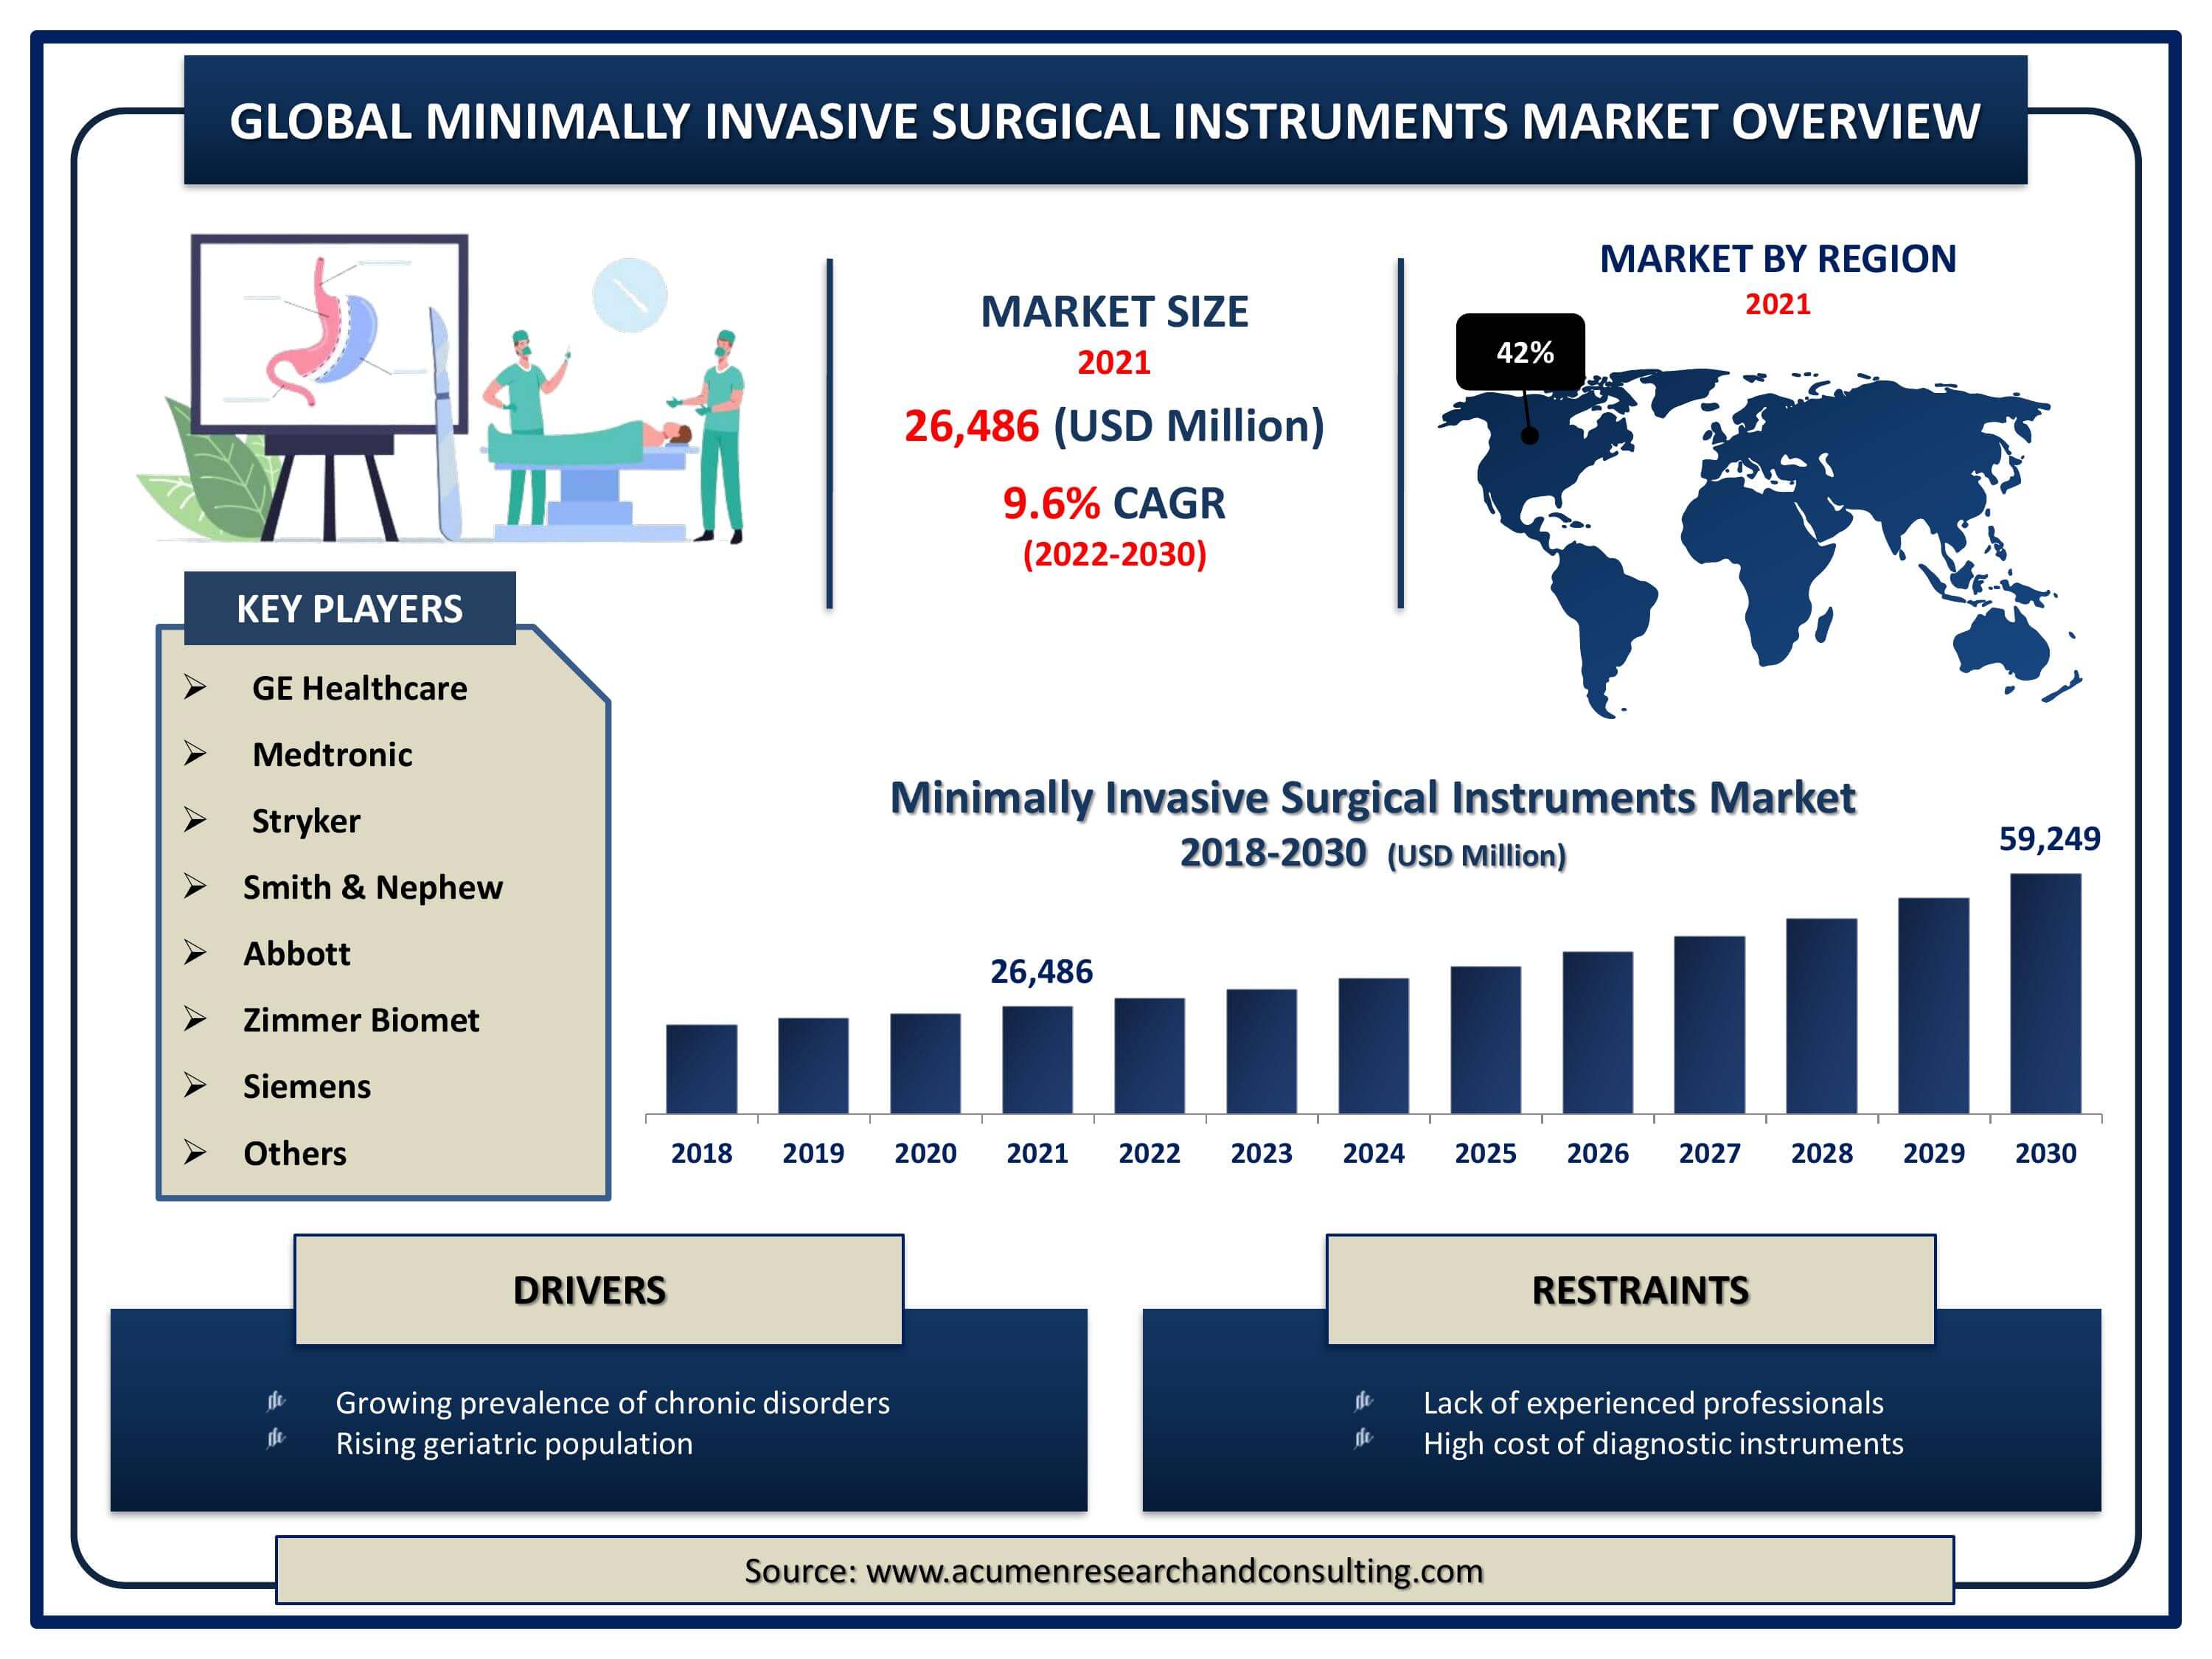 Global minimally invasive surgical instruments market revenue is expected to increase by USD 59,249 million by 2030, with a 9.6% CAGR from 2022 to 2030